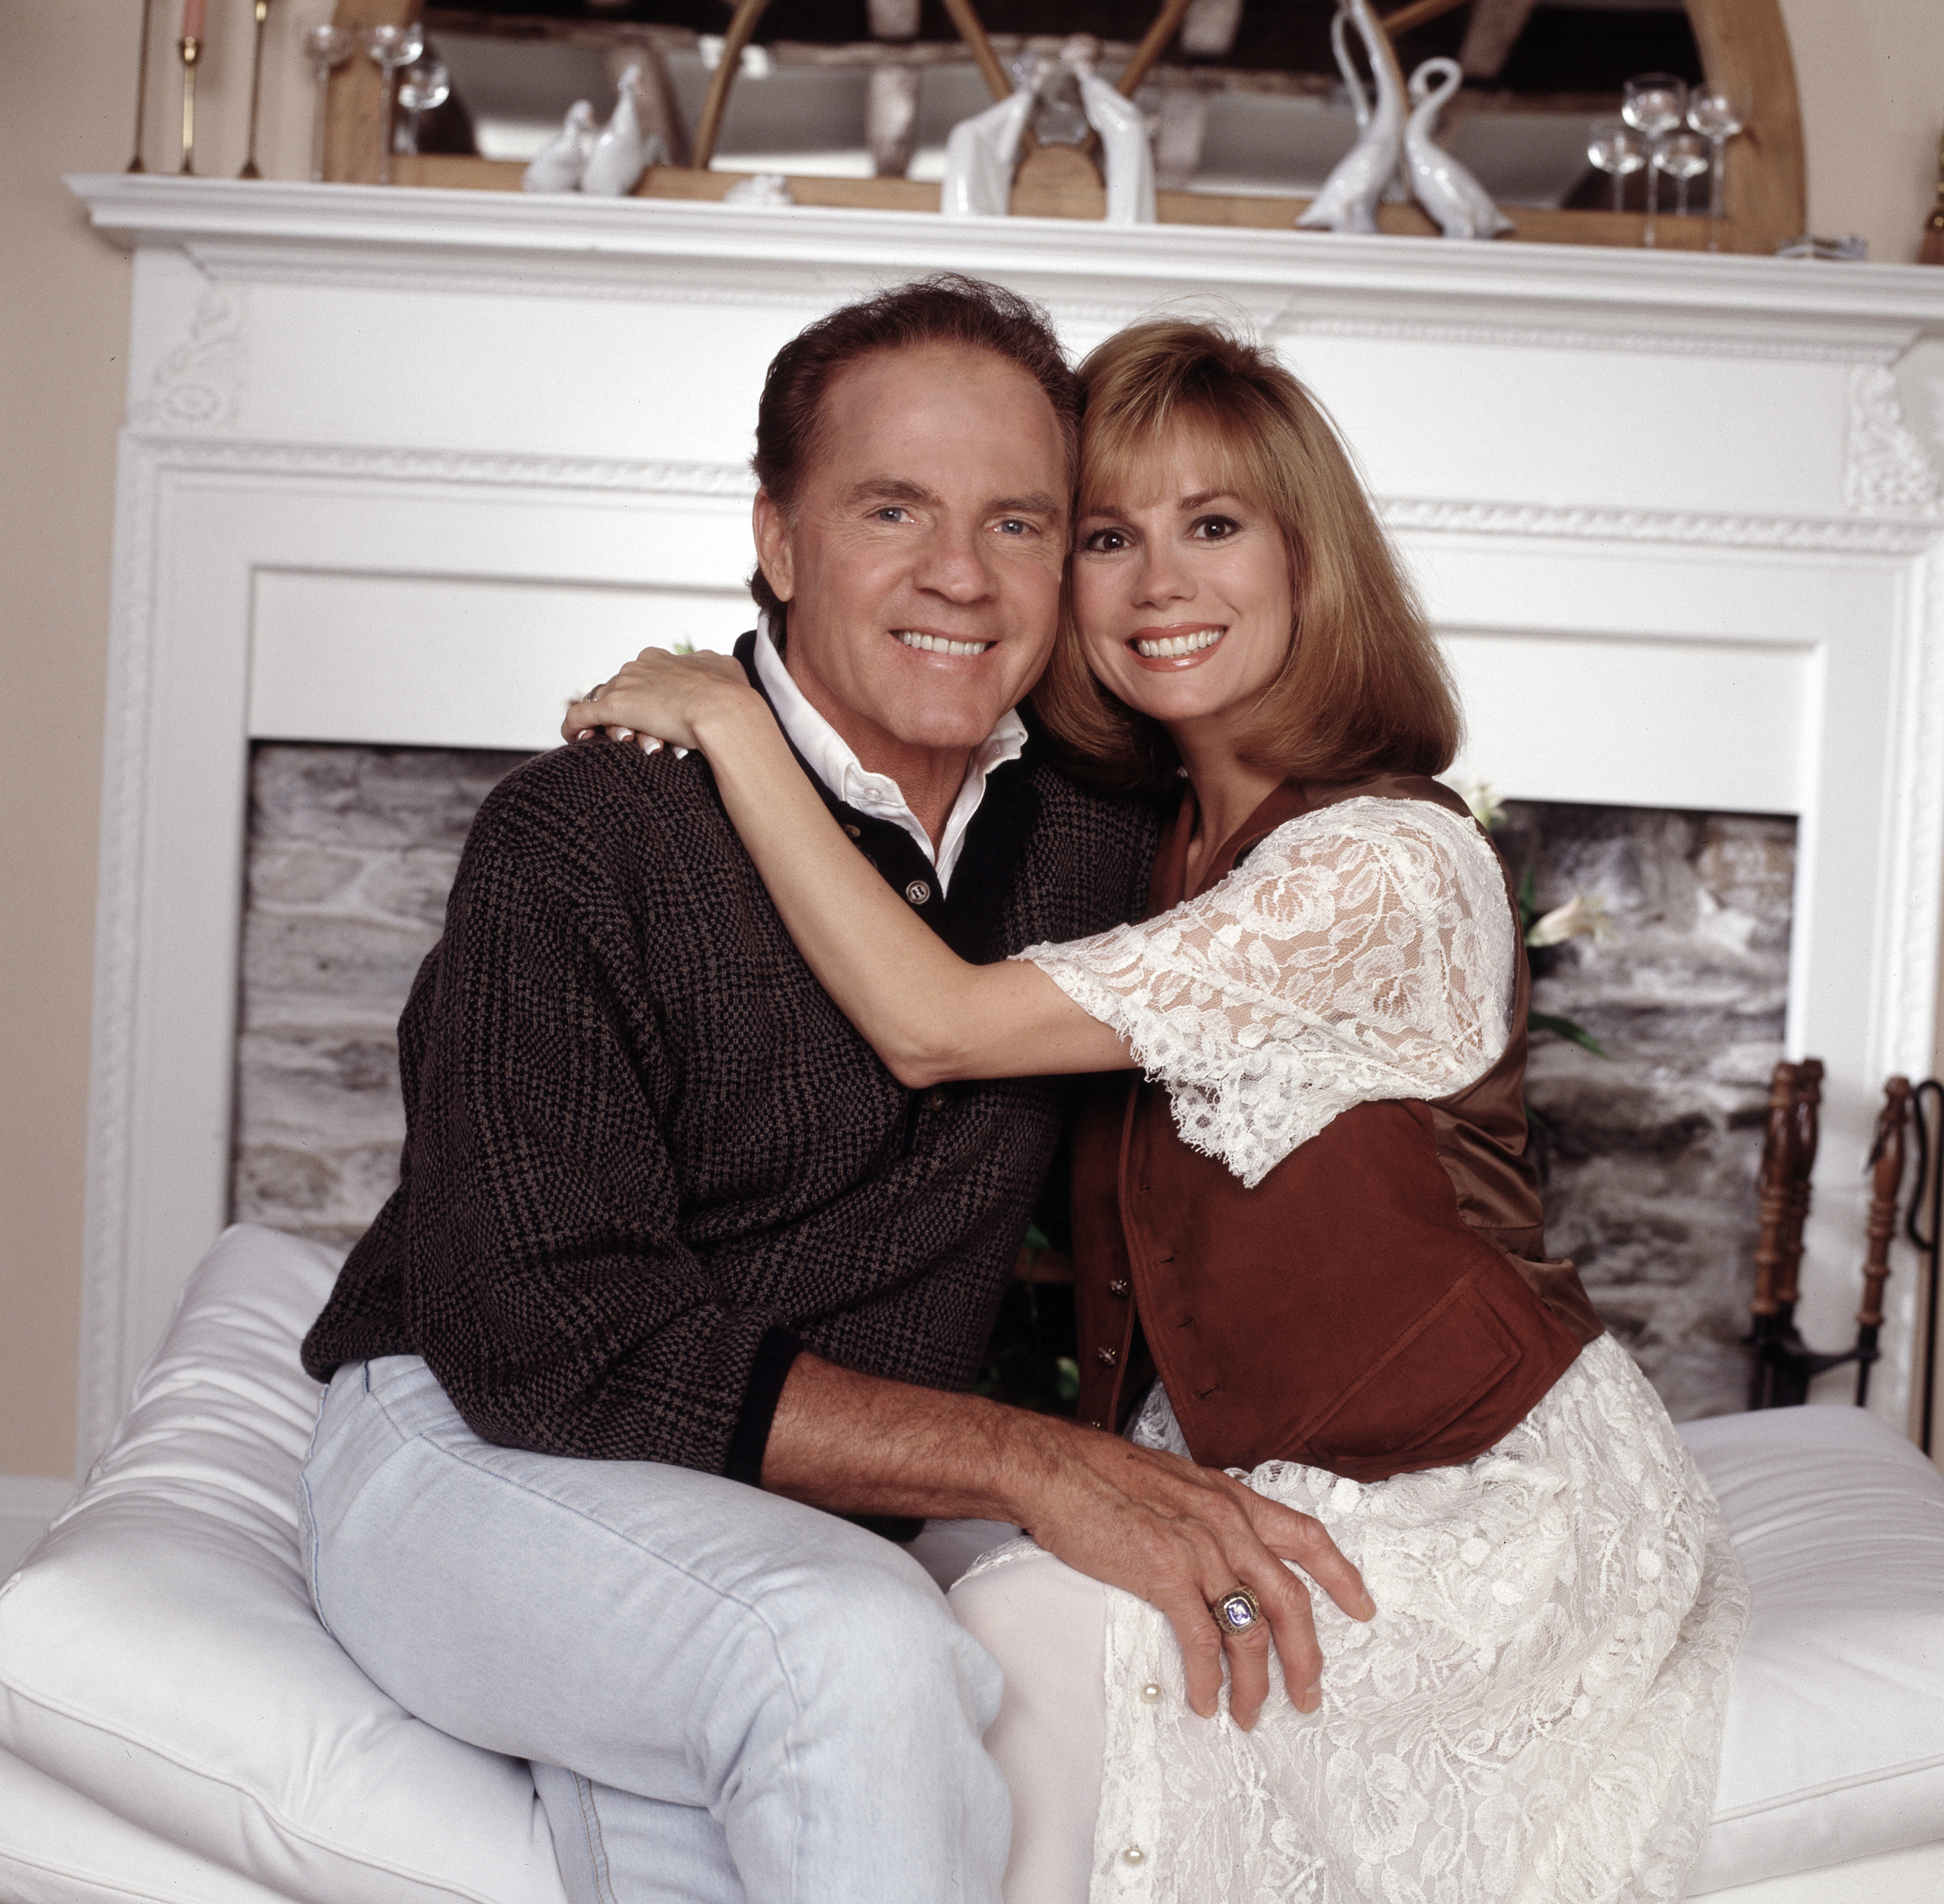 Frank Gifford and Kathie Lee Gifford on October 5, 1992 | Source: Getty Images